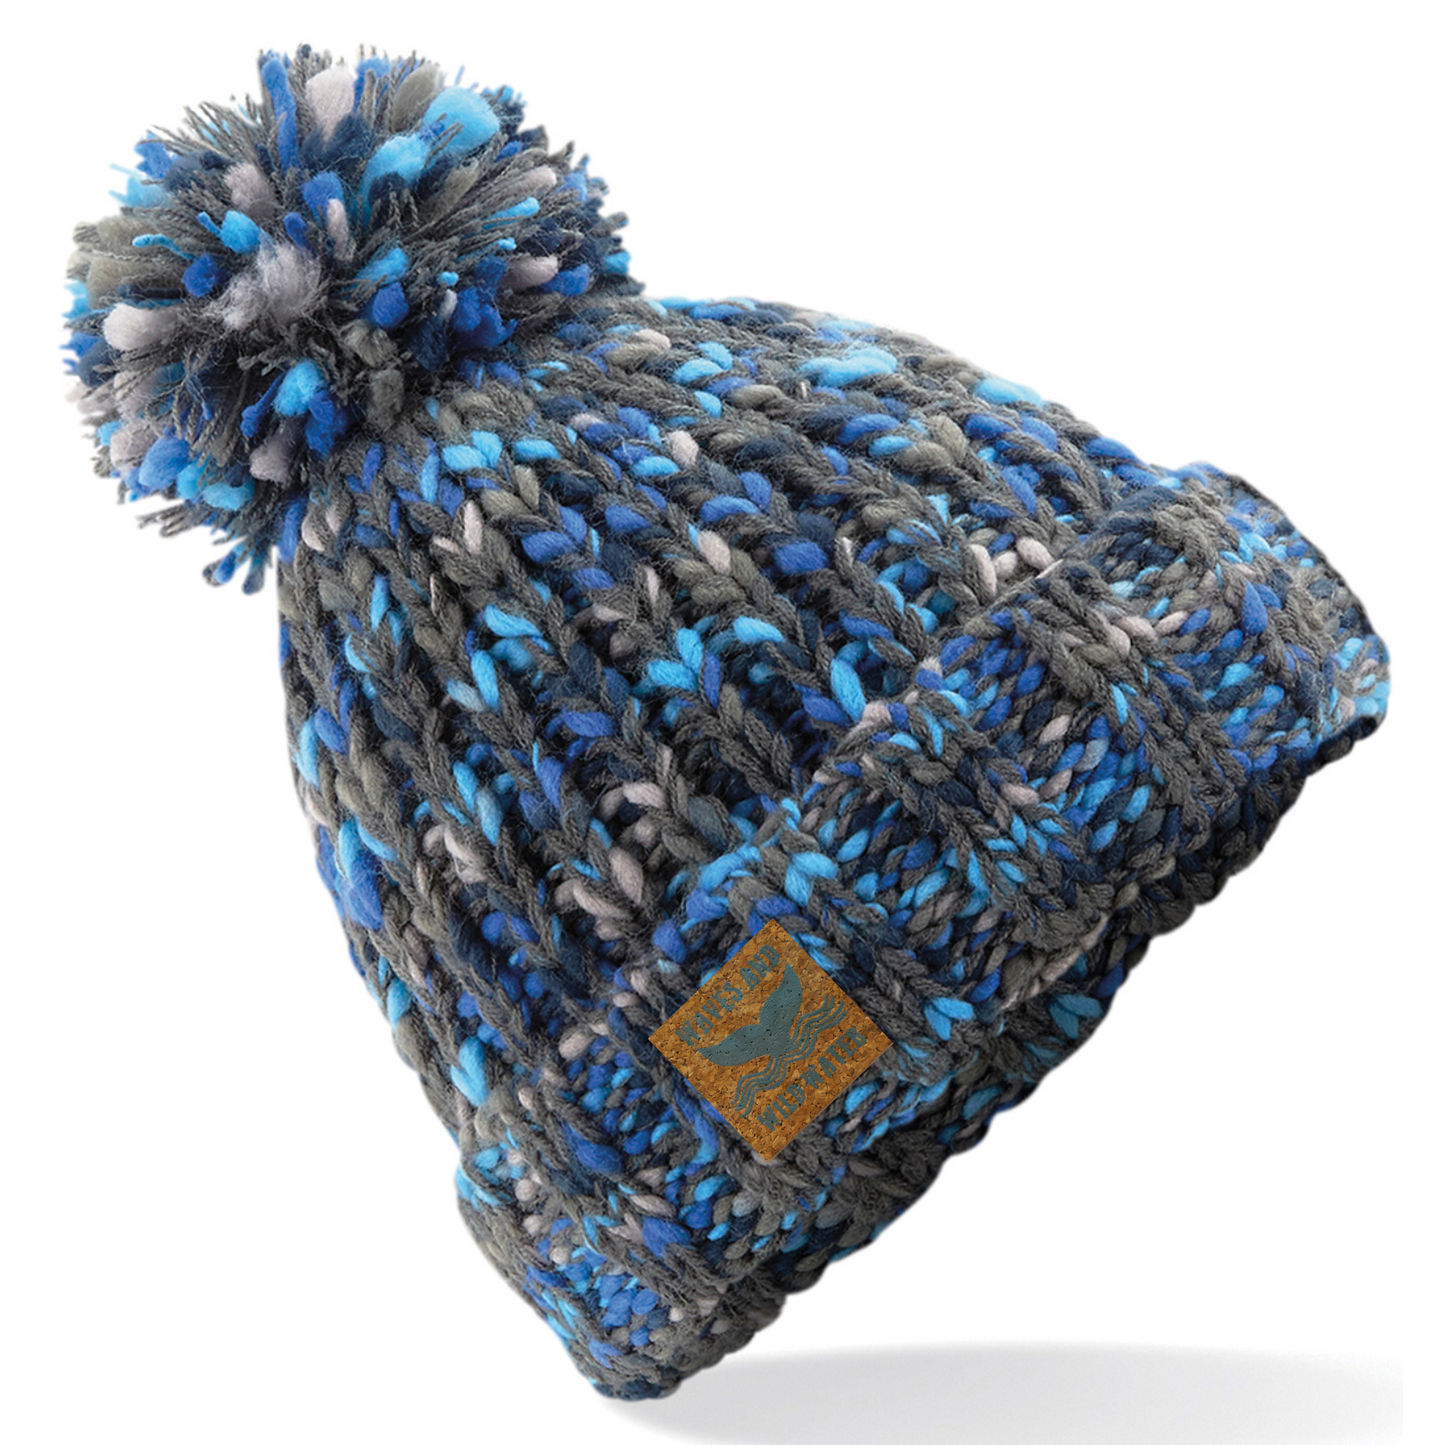 A grey and blue chunky knitted beanie hat with a pom pom.